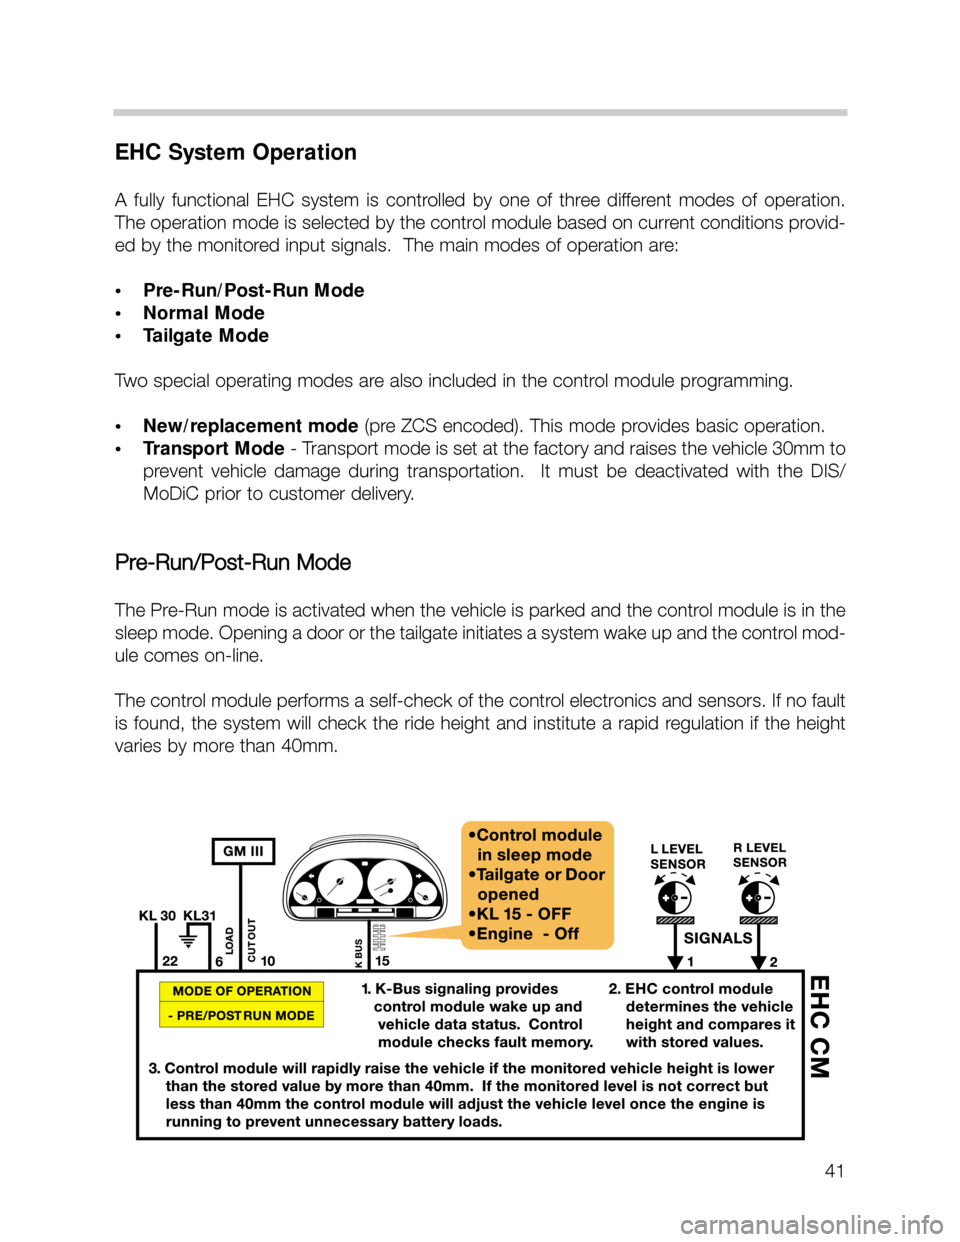 BMW X5 2001 E53 Workshop Manual 41
EHC System Operation
A  fully  functional  EHC  system  is  controlled  by  one  of  three  different  modes  of  operation.
The operation mode is selected by the control module based on current co